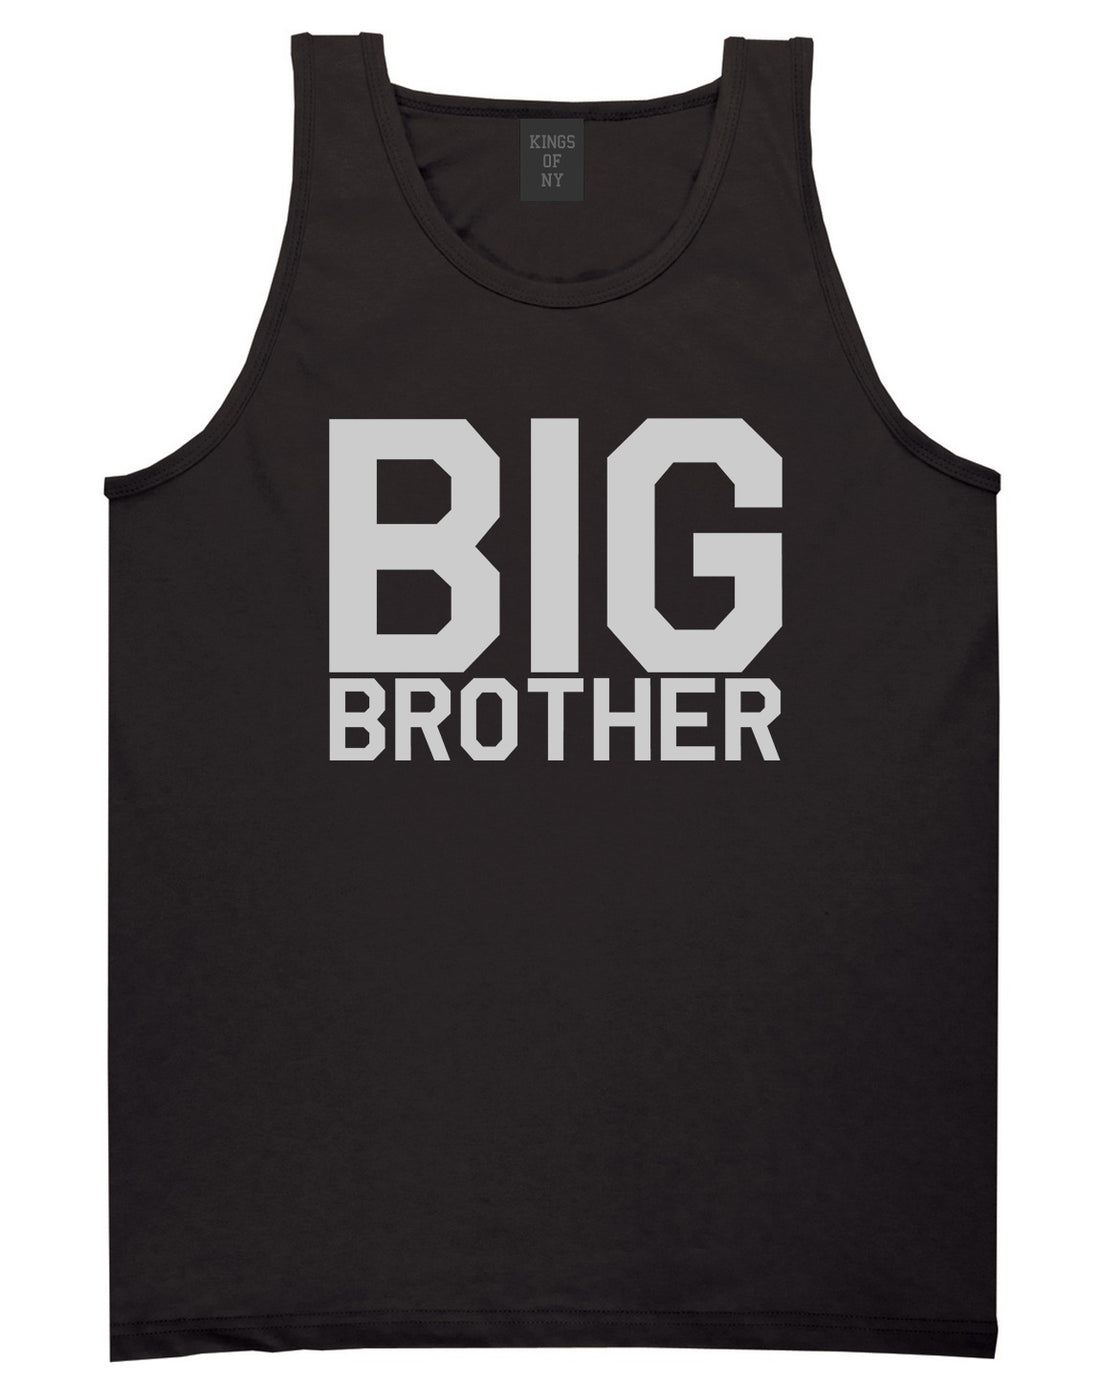 Big Brother Black Tank Top Shirt by Kings Of NY